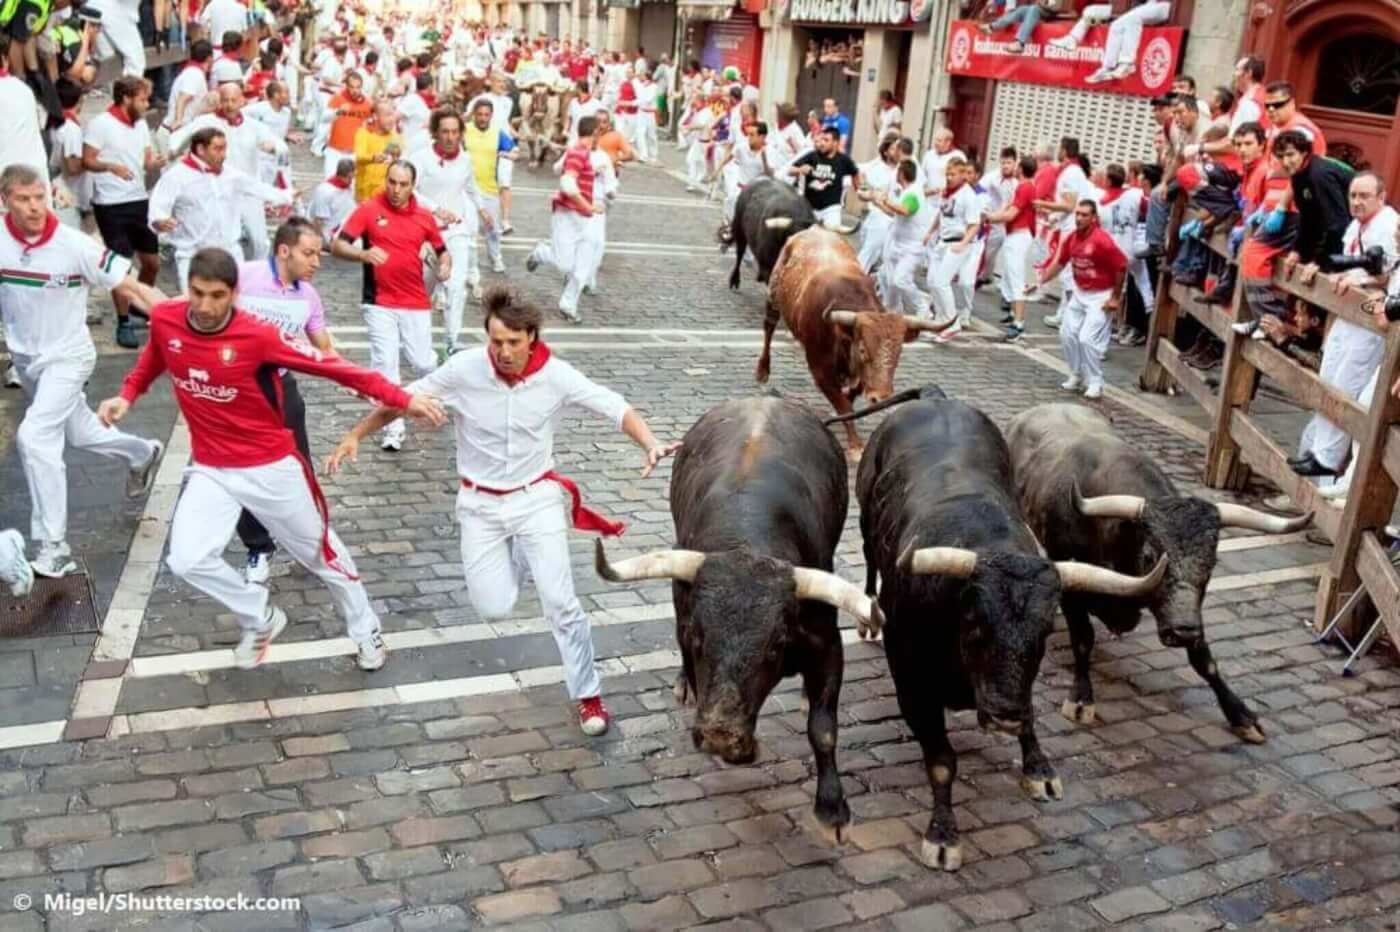 A group of men and three bulls running down a street